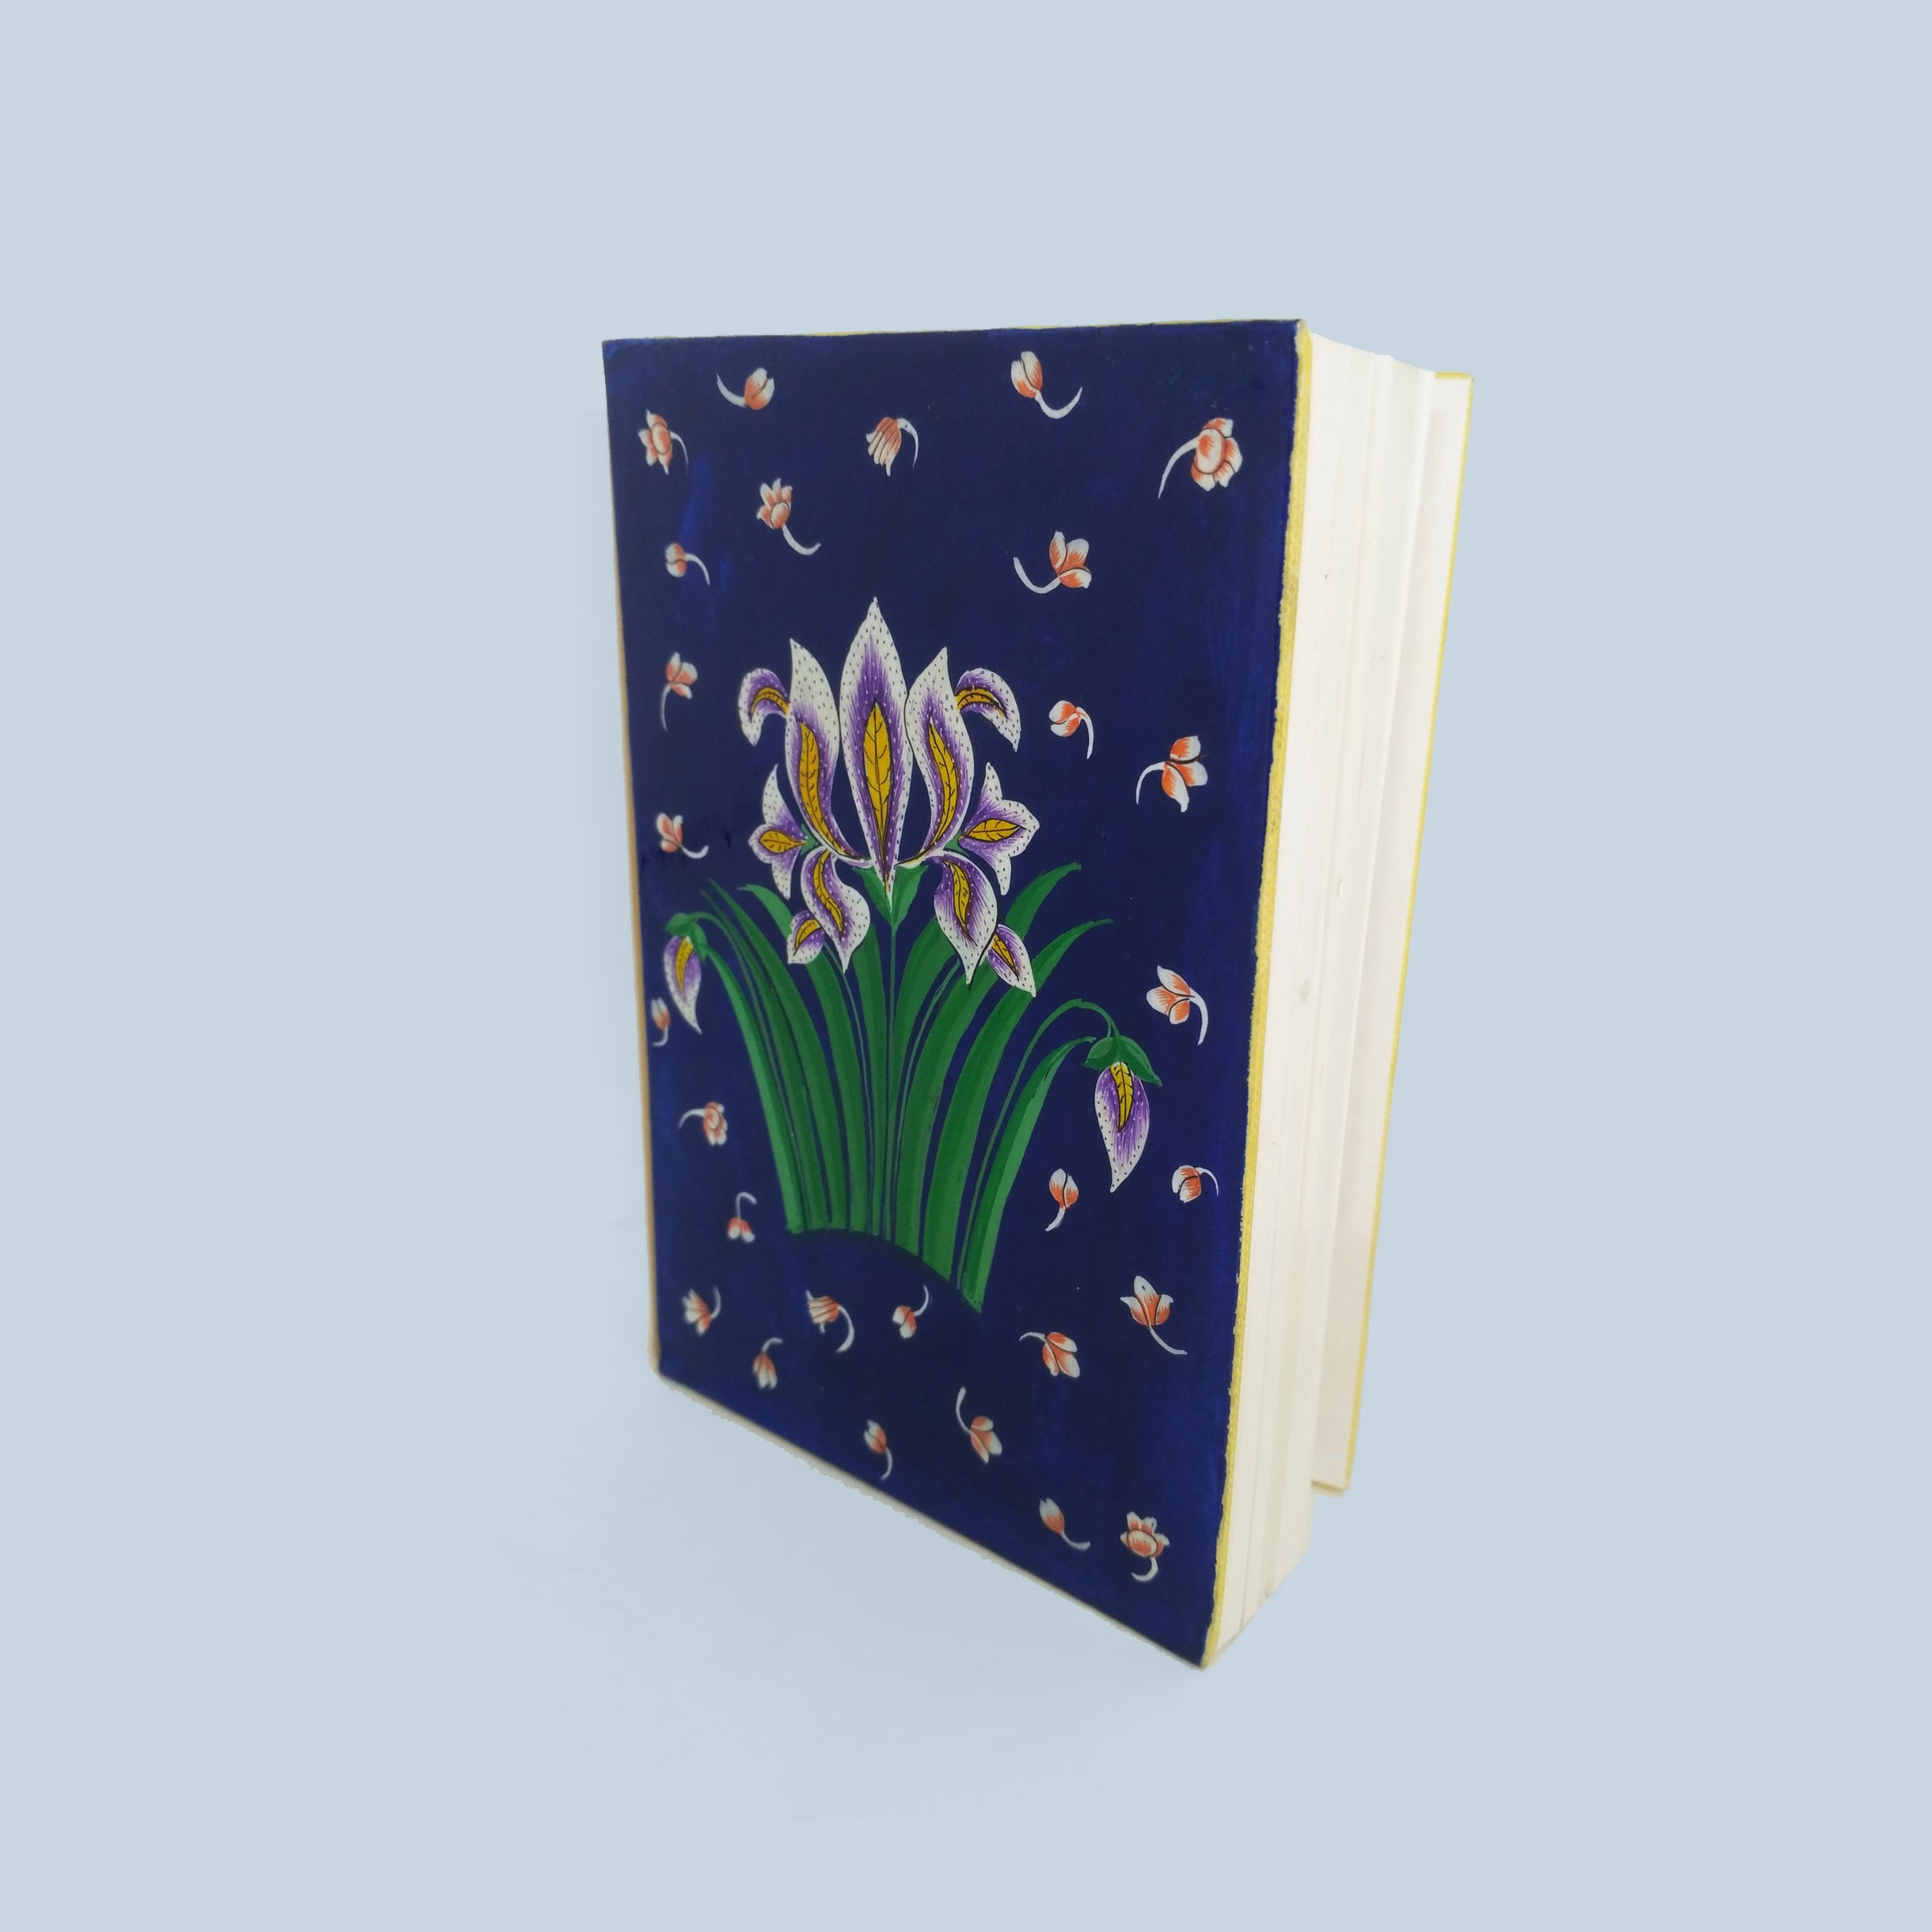 Iris - Hand-Painted A6-size Notebook